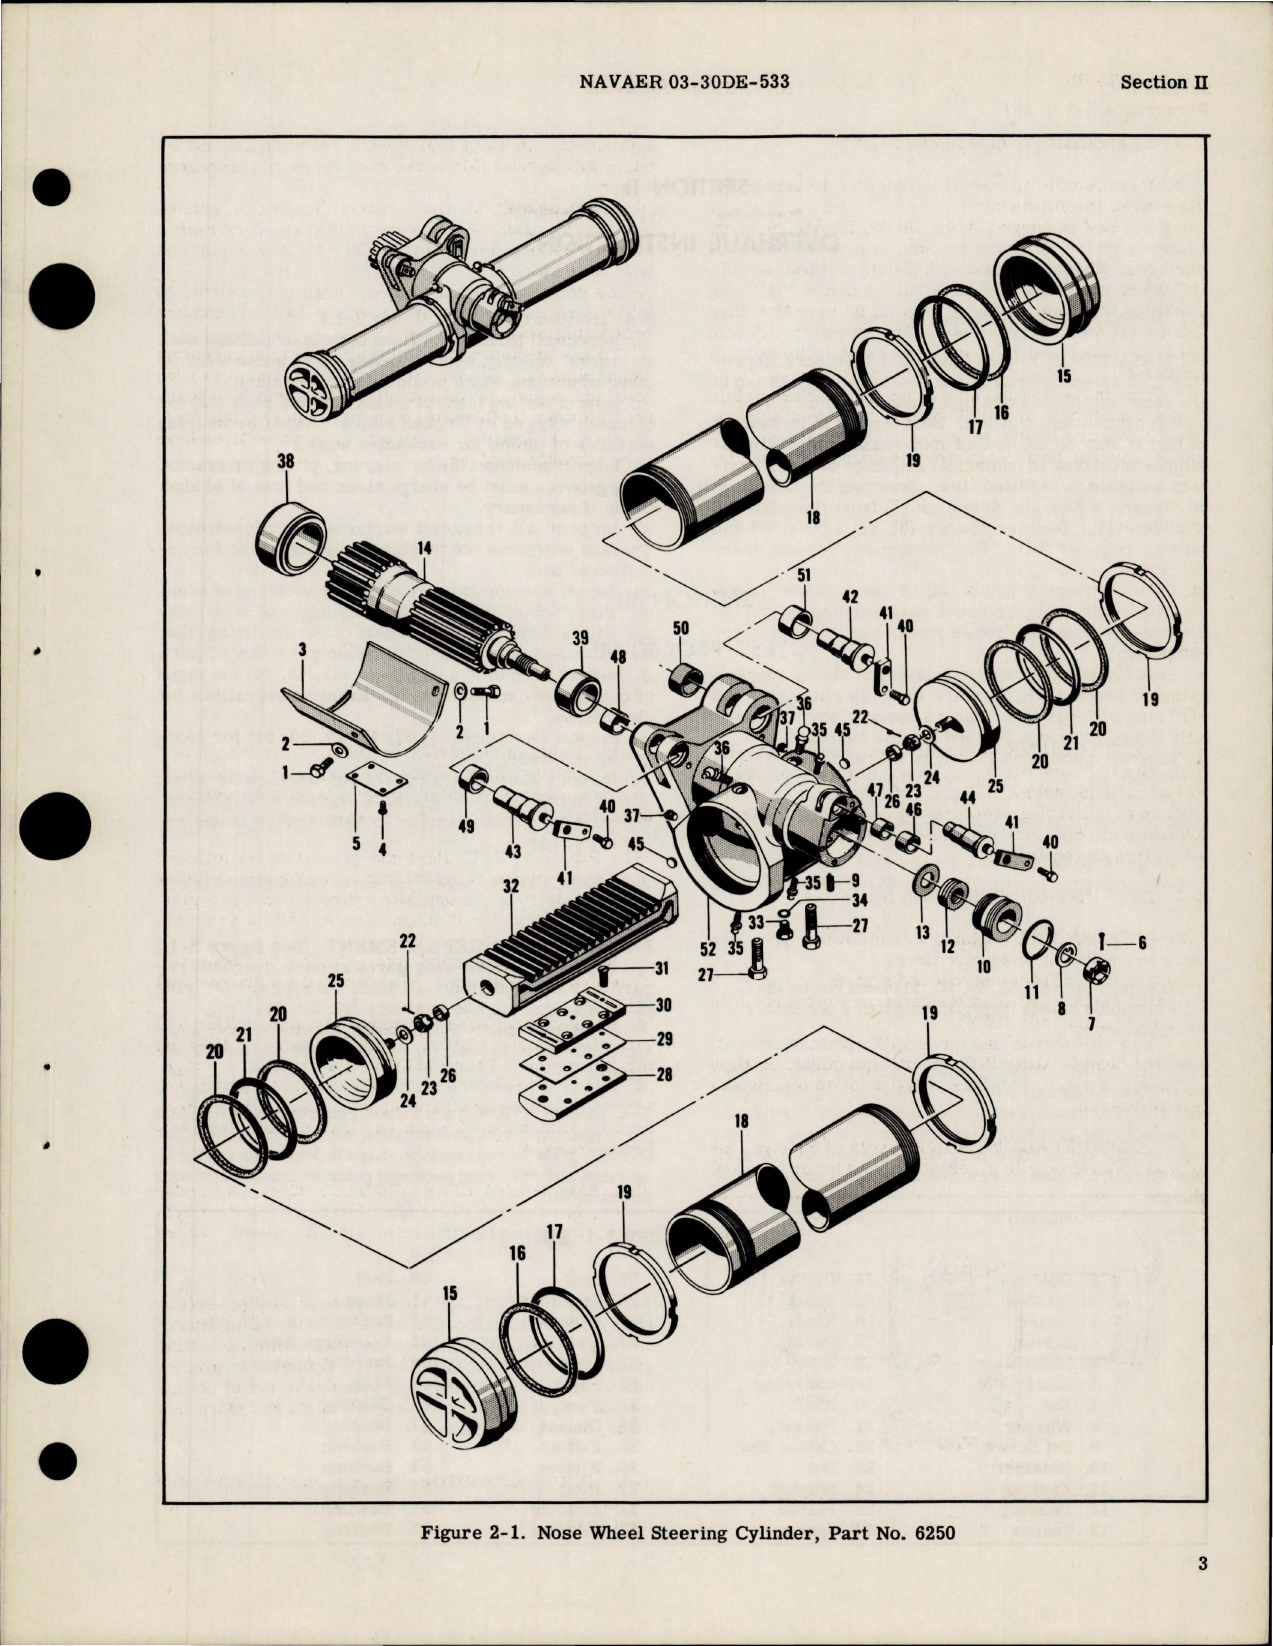 Sample page 5 from AirCorps Library document: Overhaul Instructions for Nose Wheel Steering Cylinders - Parts 6250, 6250-2, 7160, 7160-2, 10150, 10260